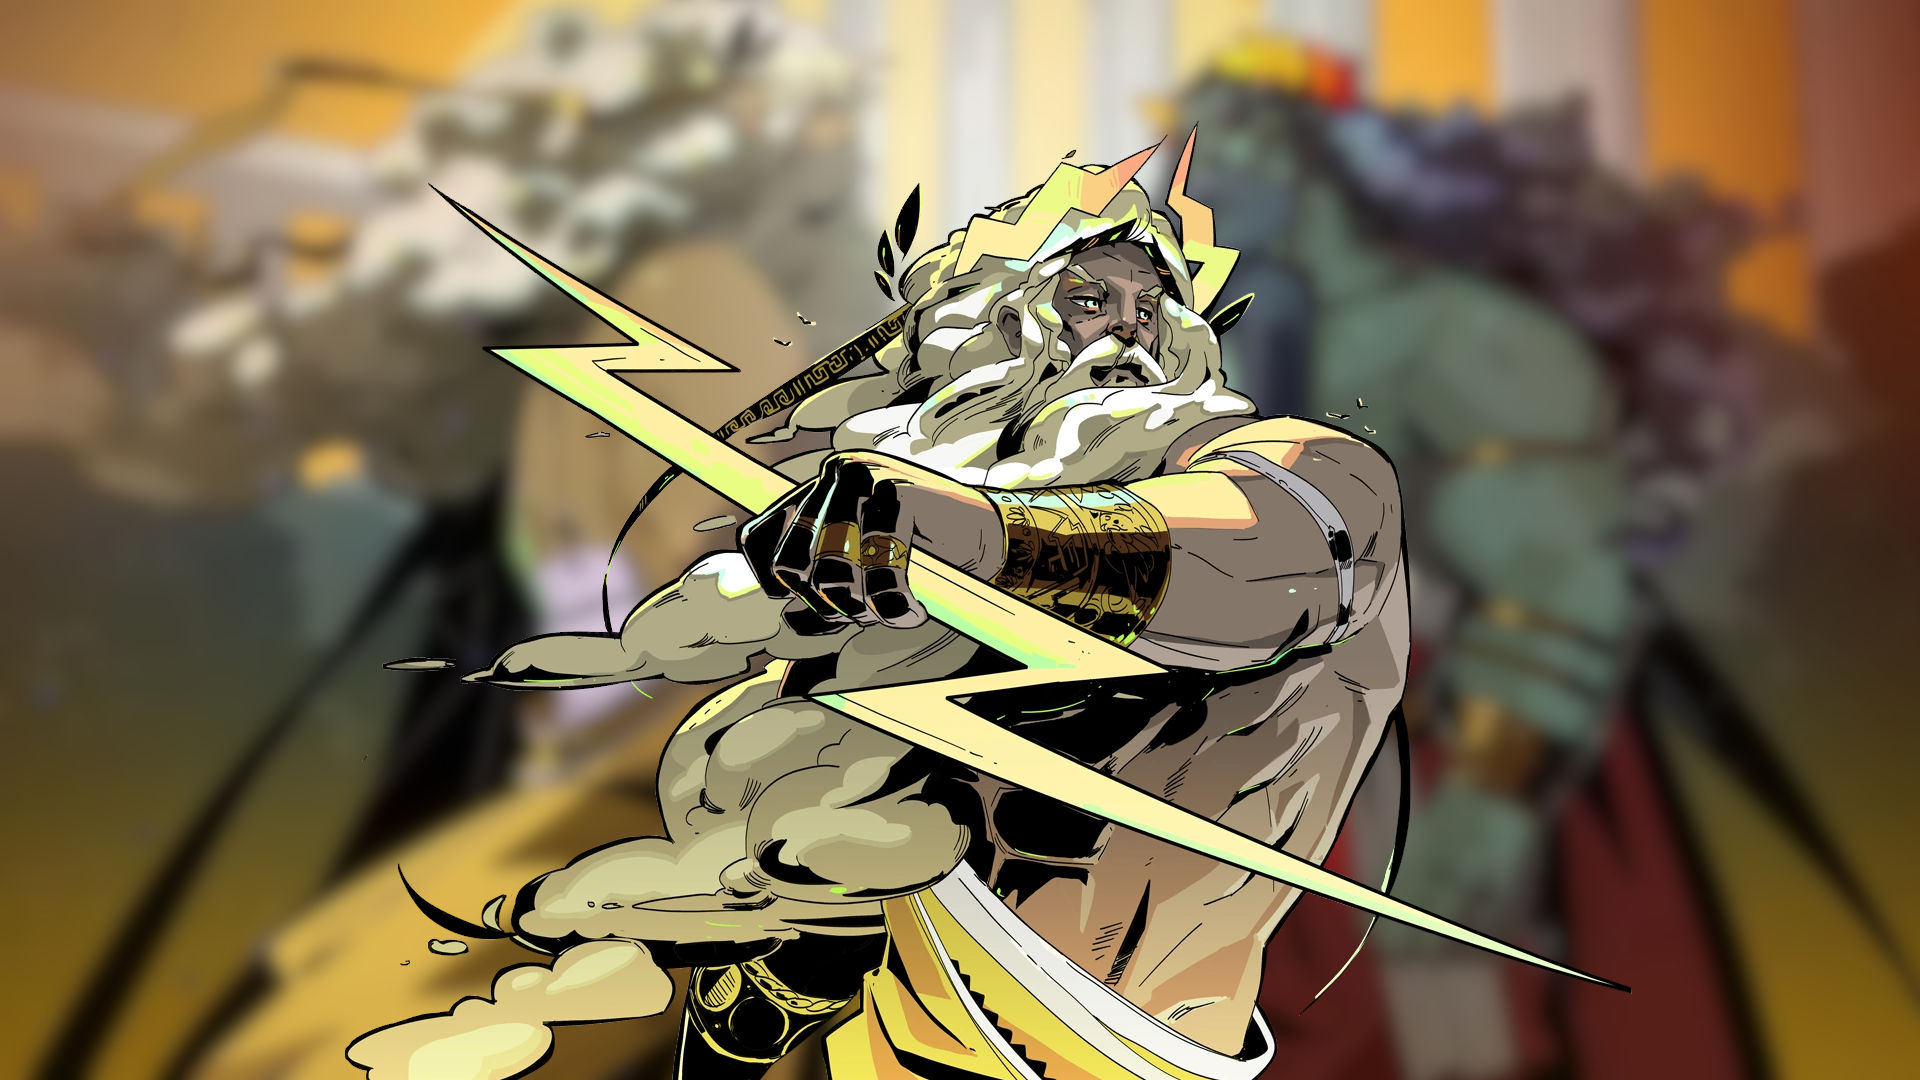 DP1350 - Games character design, the God of battle with zeus head